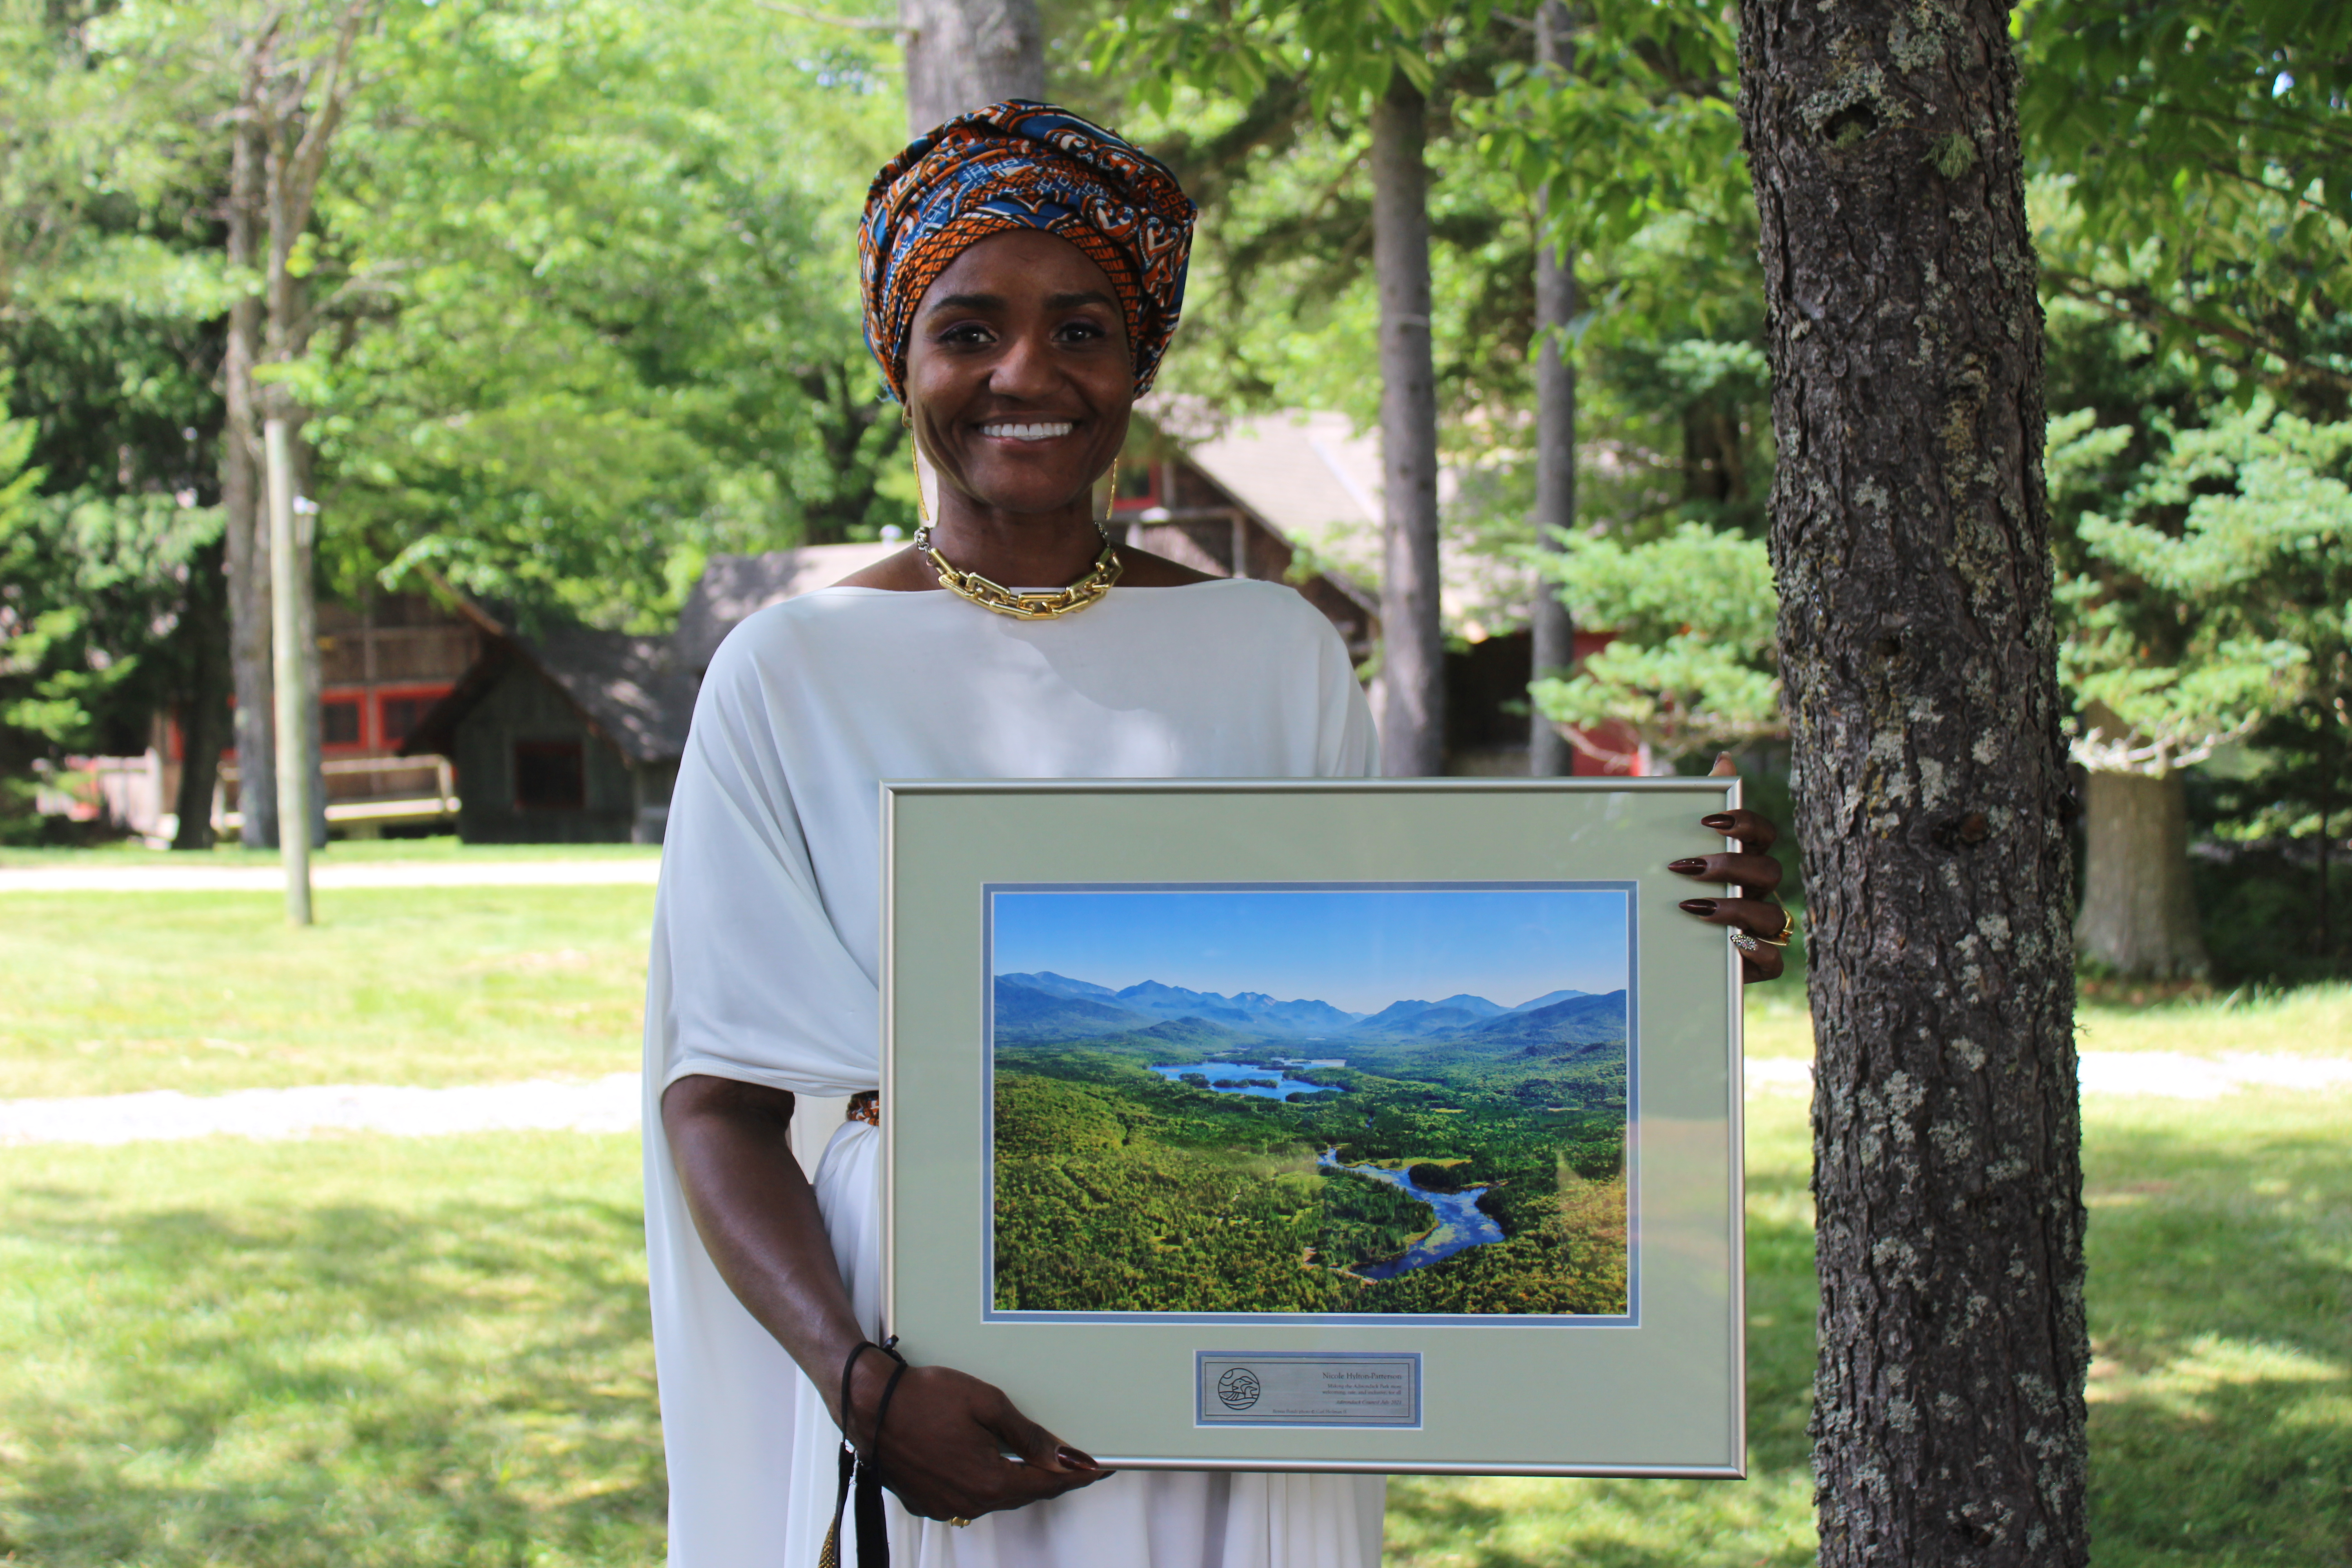 Nicole Hylton-Patterson with an award given to her by the Adirondack Council